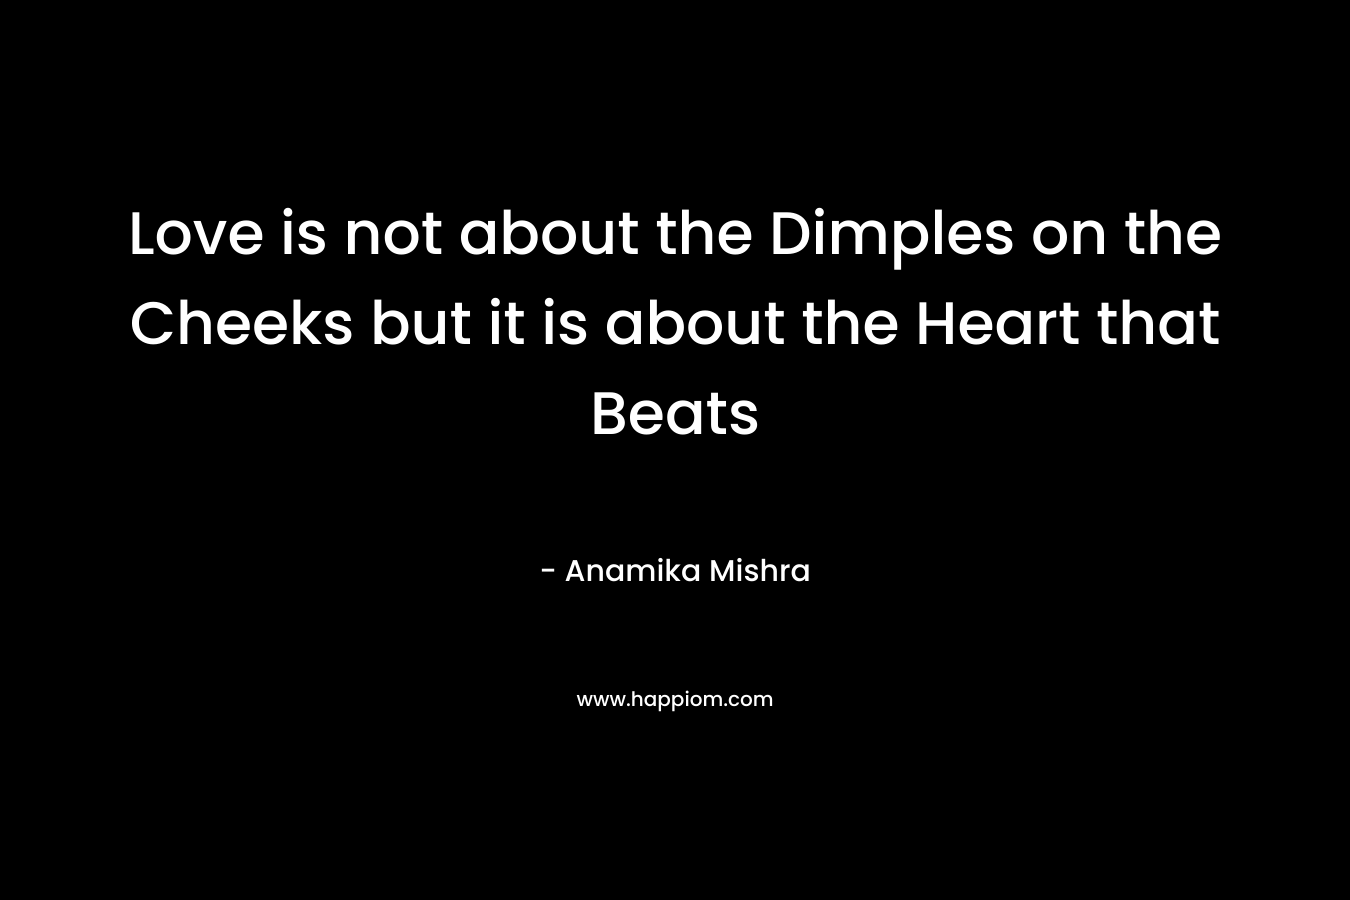 Love is not about the Dimples on the Cheeks but it is about the Heart that Beats – Anamika Mishra